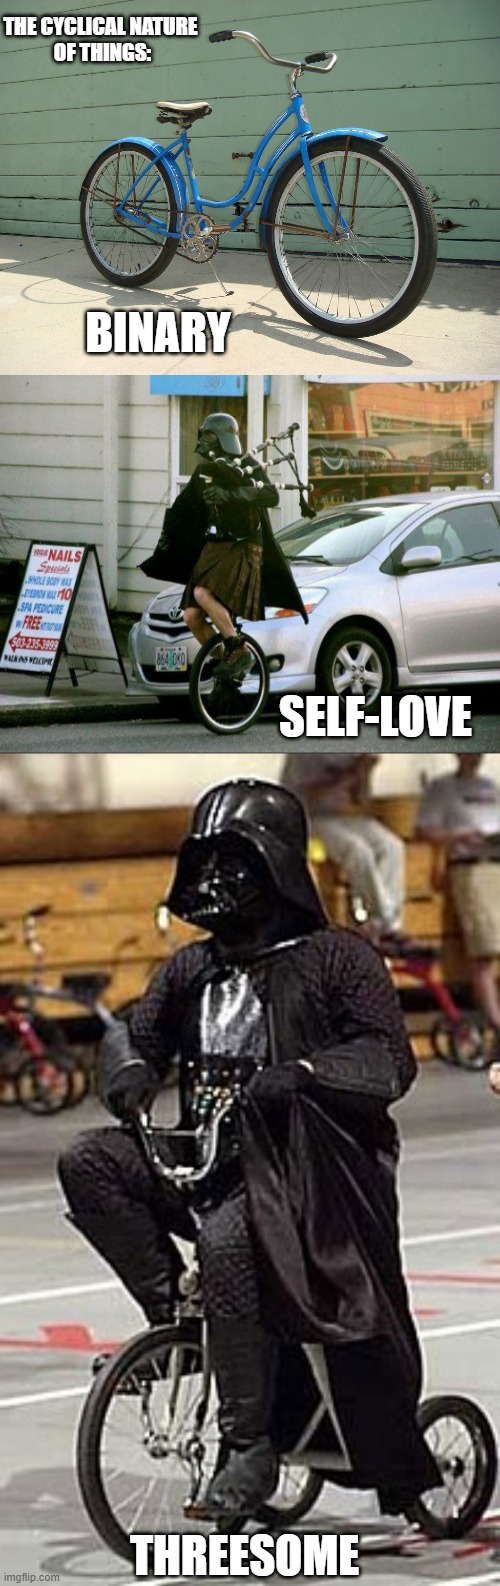 TRANSMANIA | BINARY SELF-LOVE THREESOME THE CYCLICAL NATURE 
OF THINGS: | image tagged in bicycle,darth vader trike,transgender,cultural marxism,bill clinton - sexual relations,bud light | made w/ Imgflip meme maker